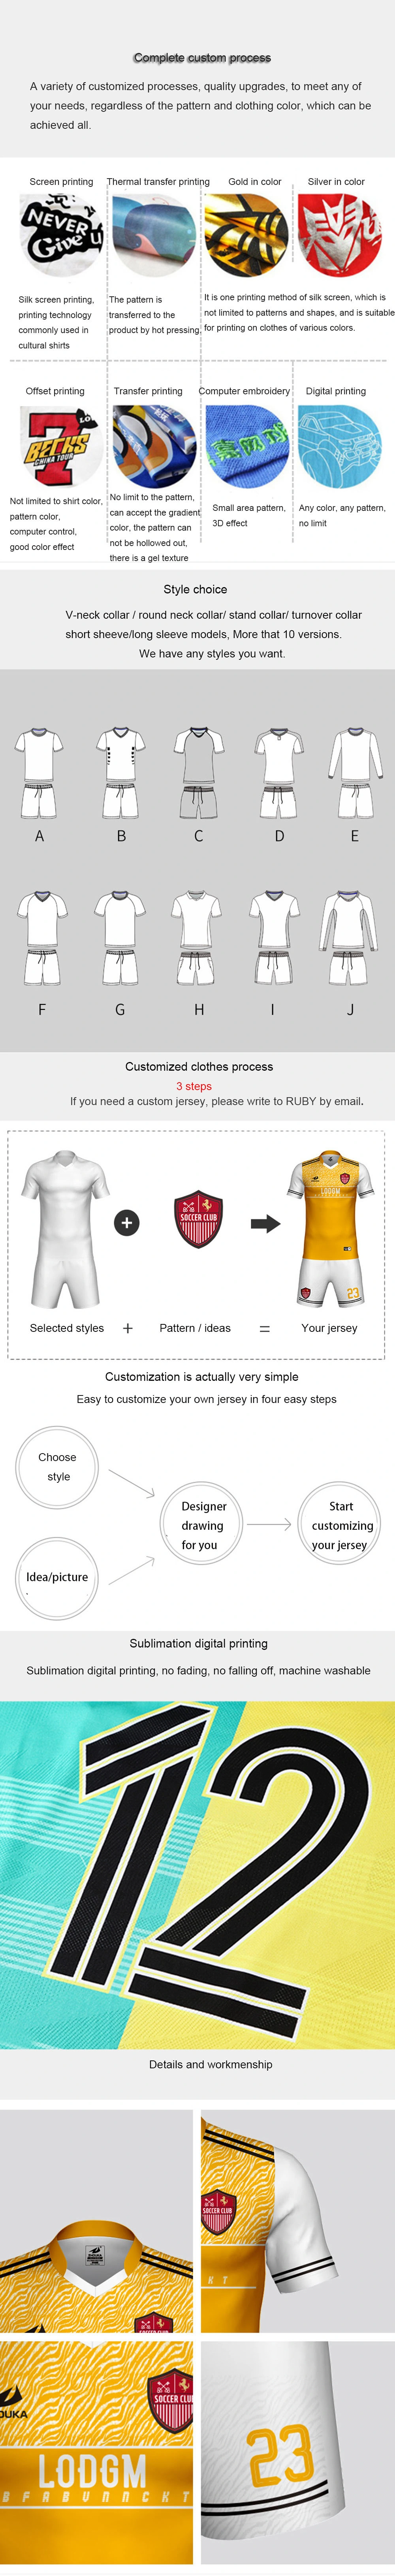 2020 Soccer Jersey New Wholesale Cheap Price Custom Football Jersey Sublimated Soccer Wear